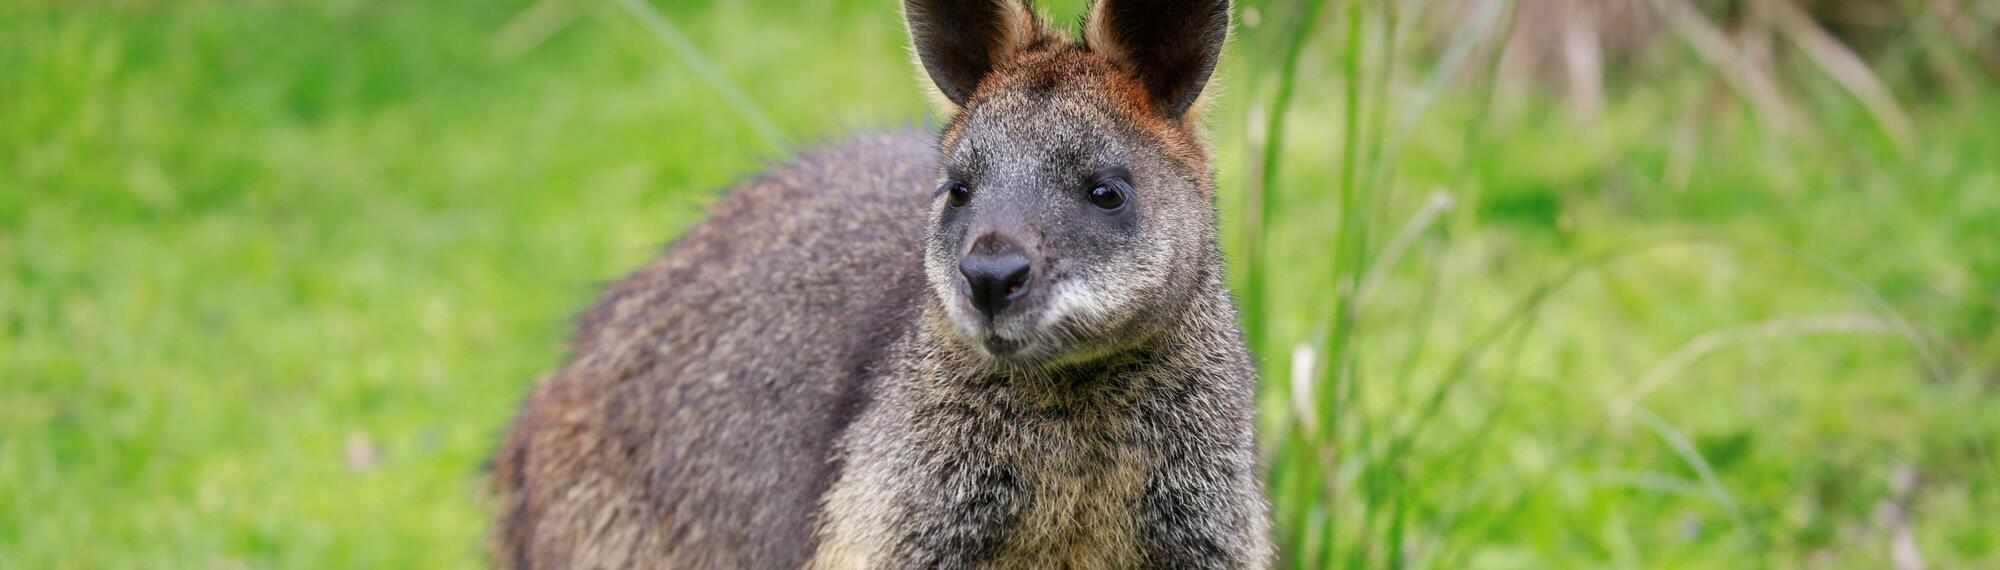 A Swamp Wallaby, standing in the grass and looking slightly right.